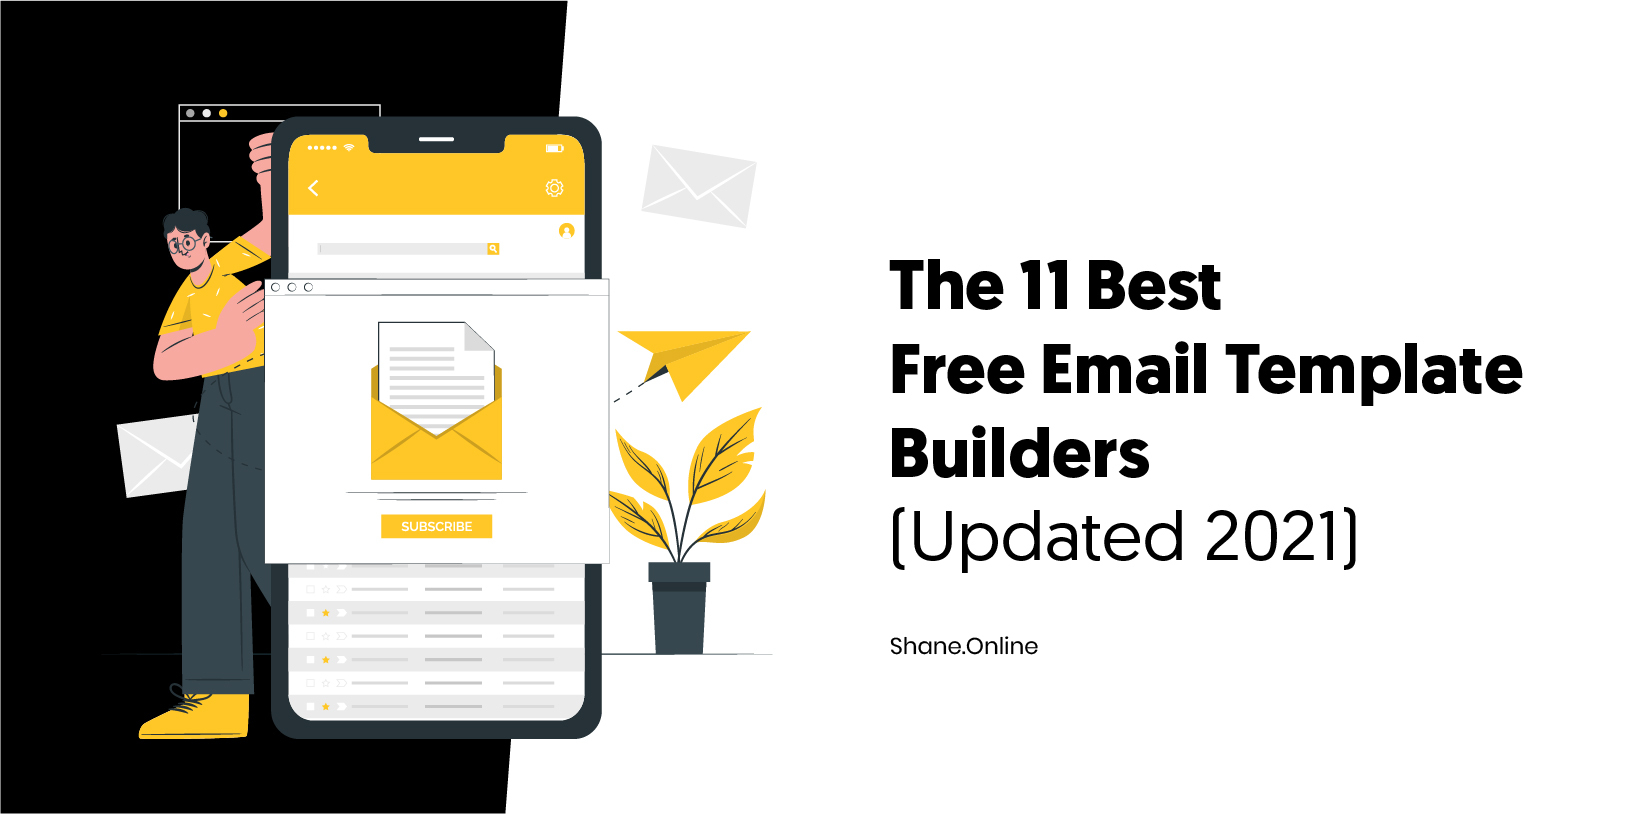 Blog 19 The 11 Best Free Email Template Builders Updated 2021